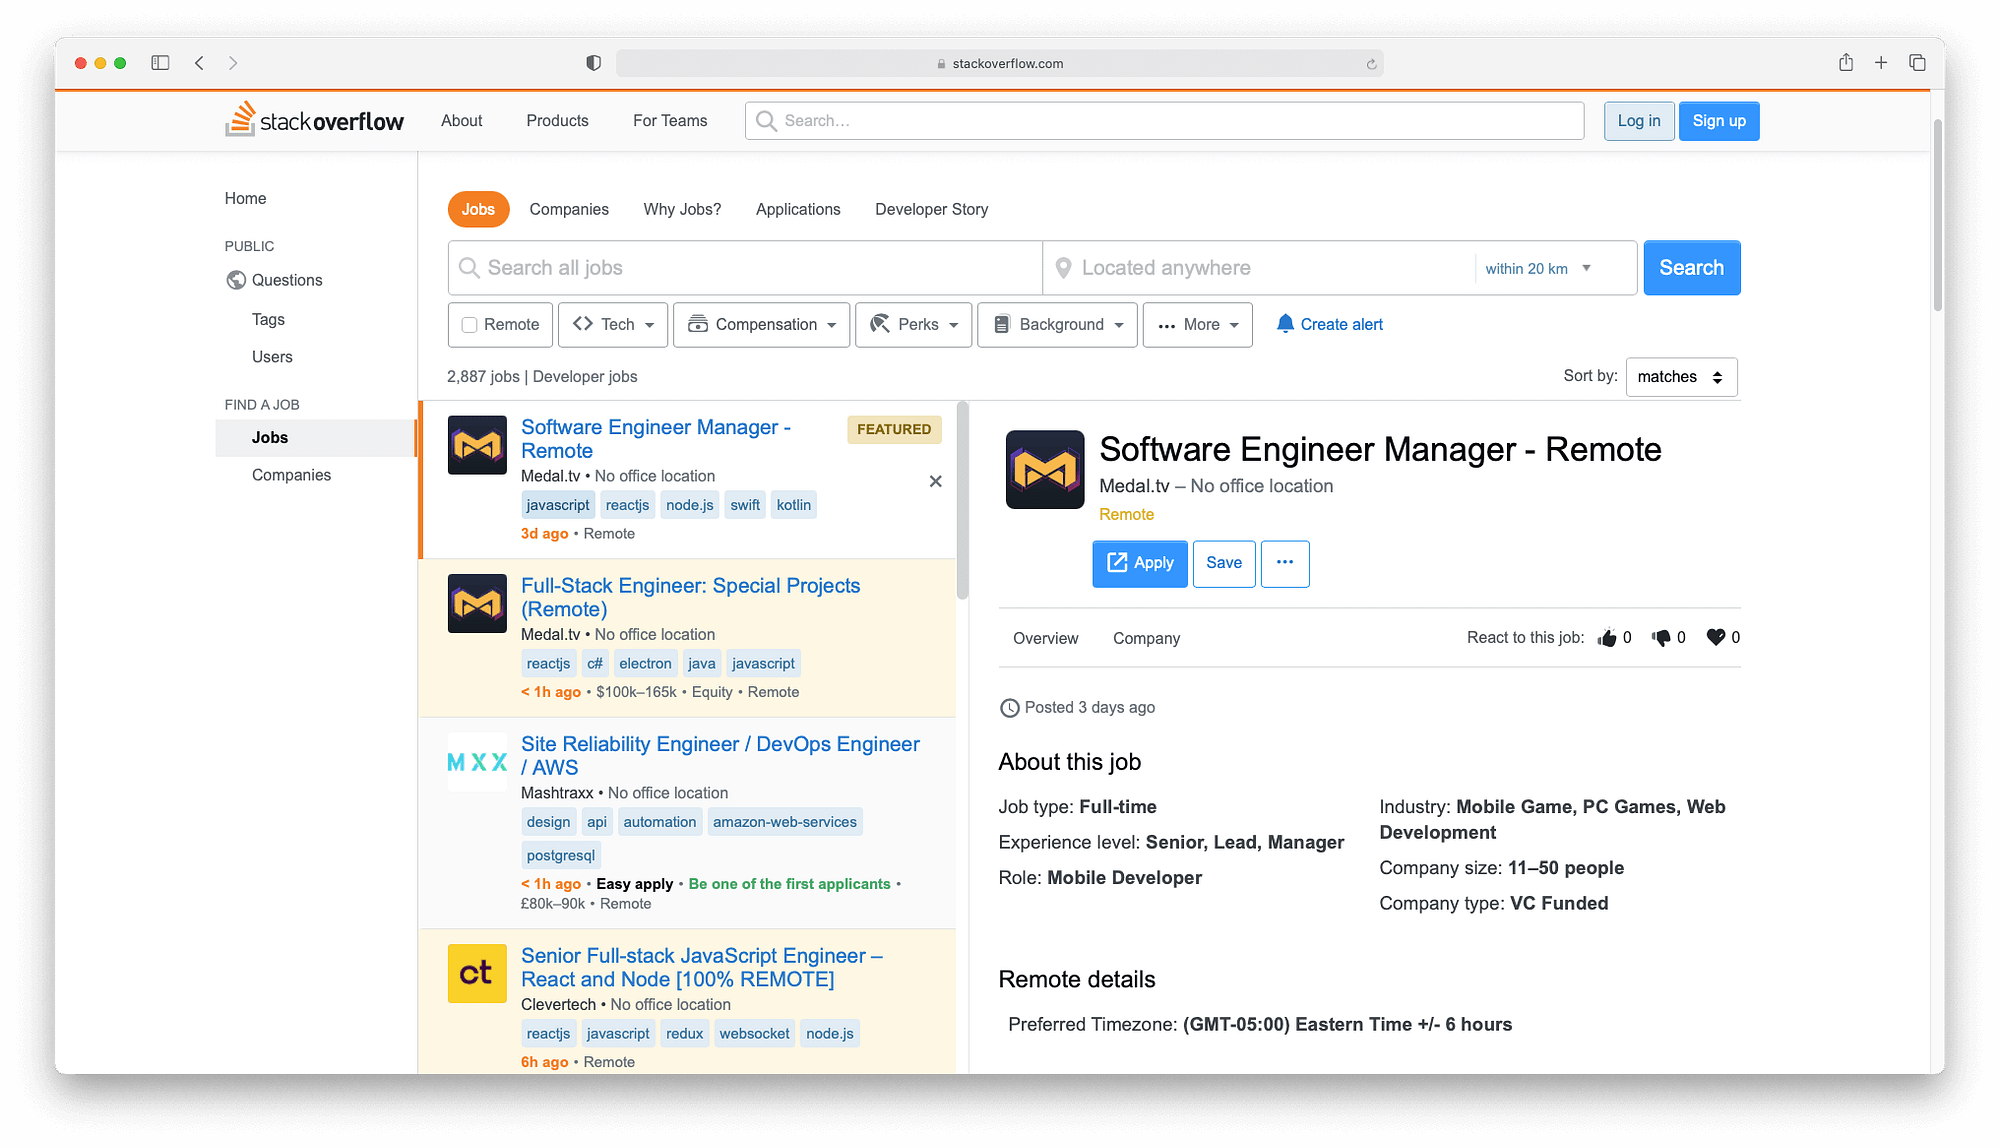 Stack Overflow also offers remote work online opportunities